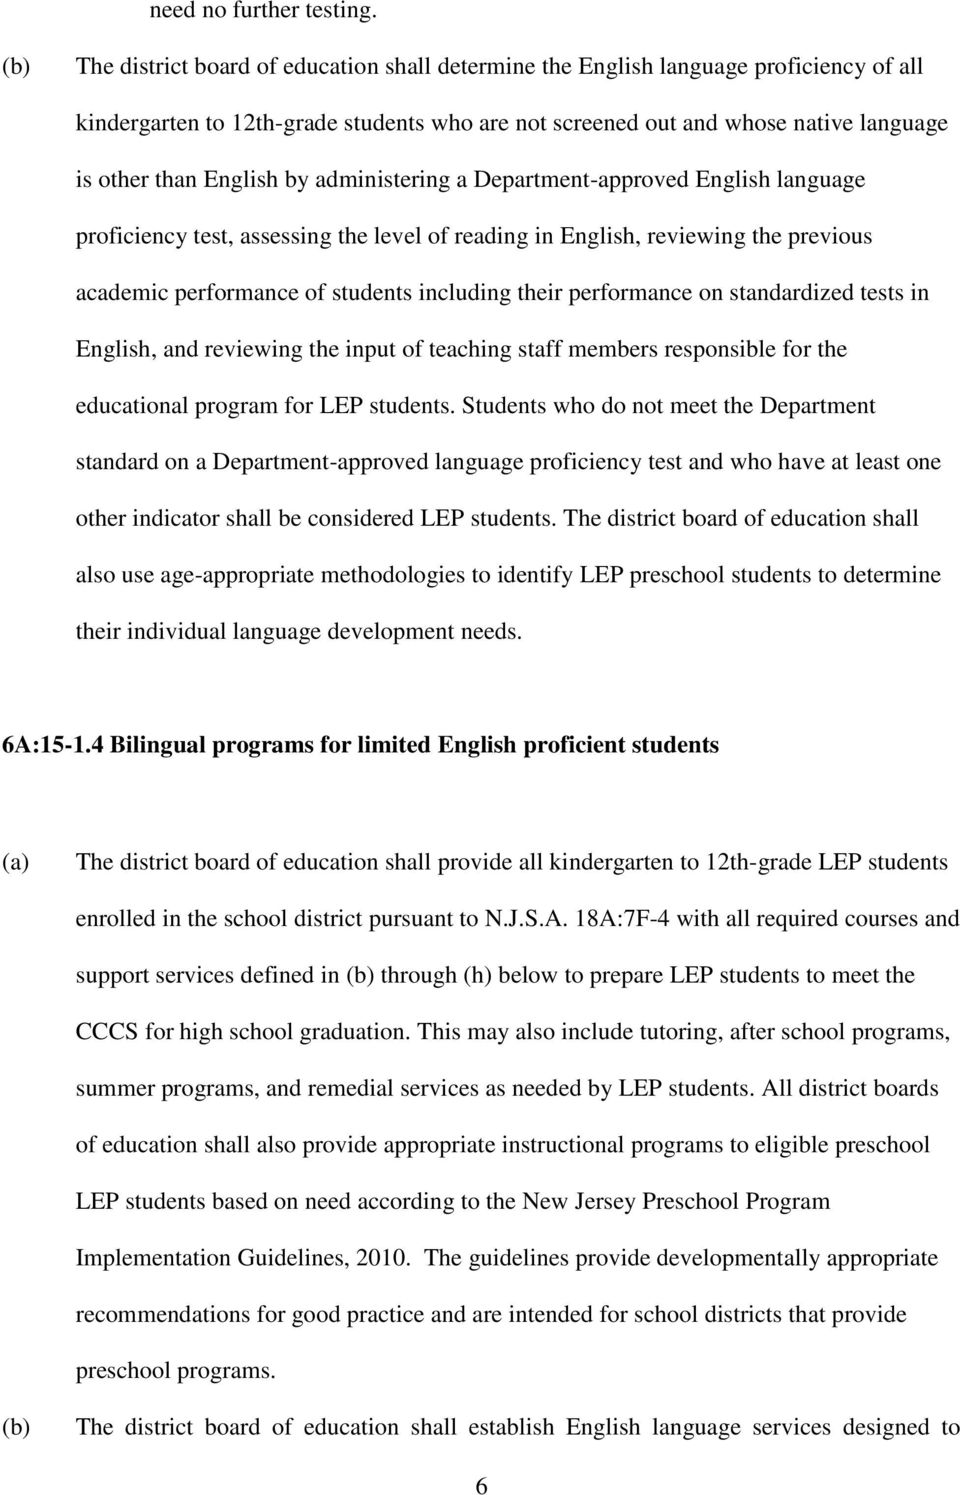 administering a Department-approved English language proficiency test, assessing the level of reading in English, reviewing the previous academic performance of students including their performance